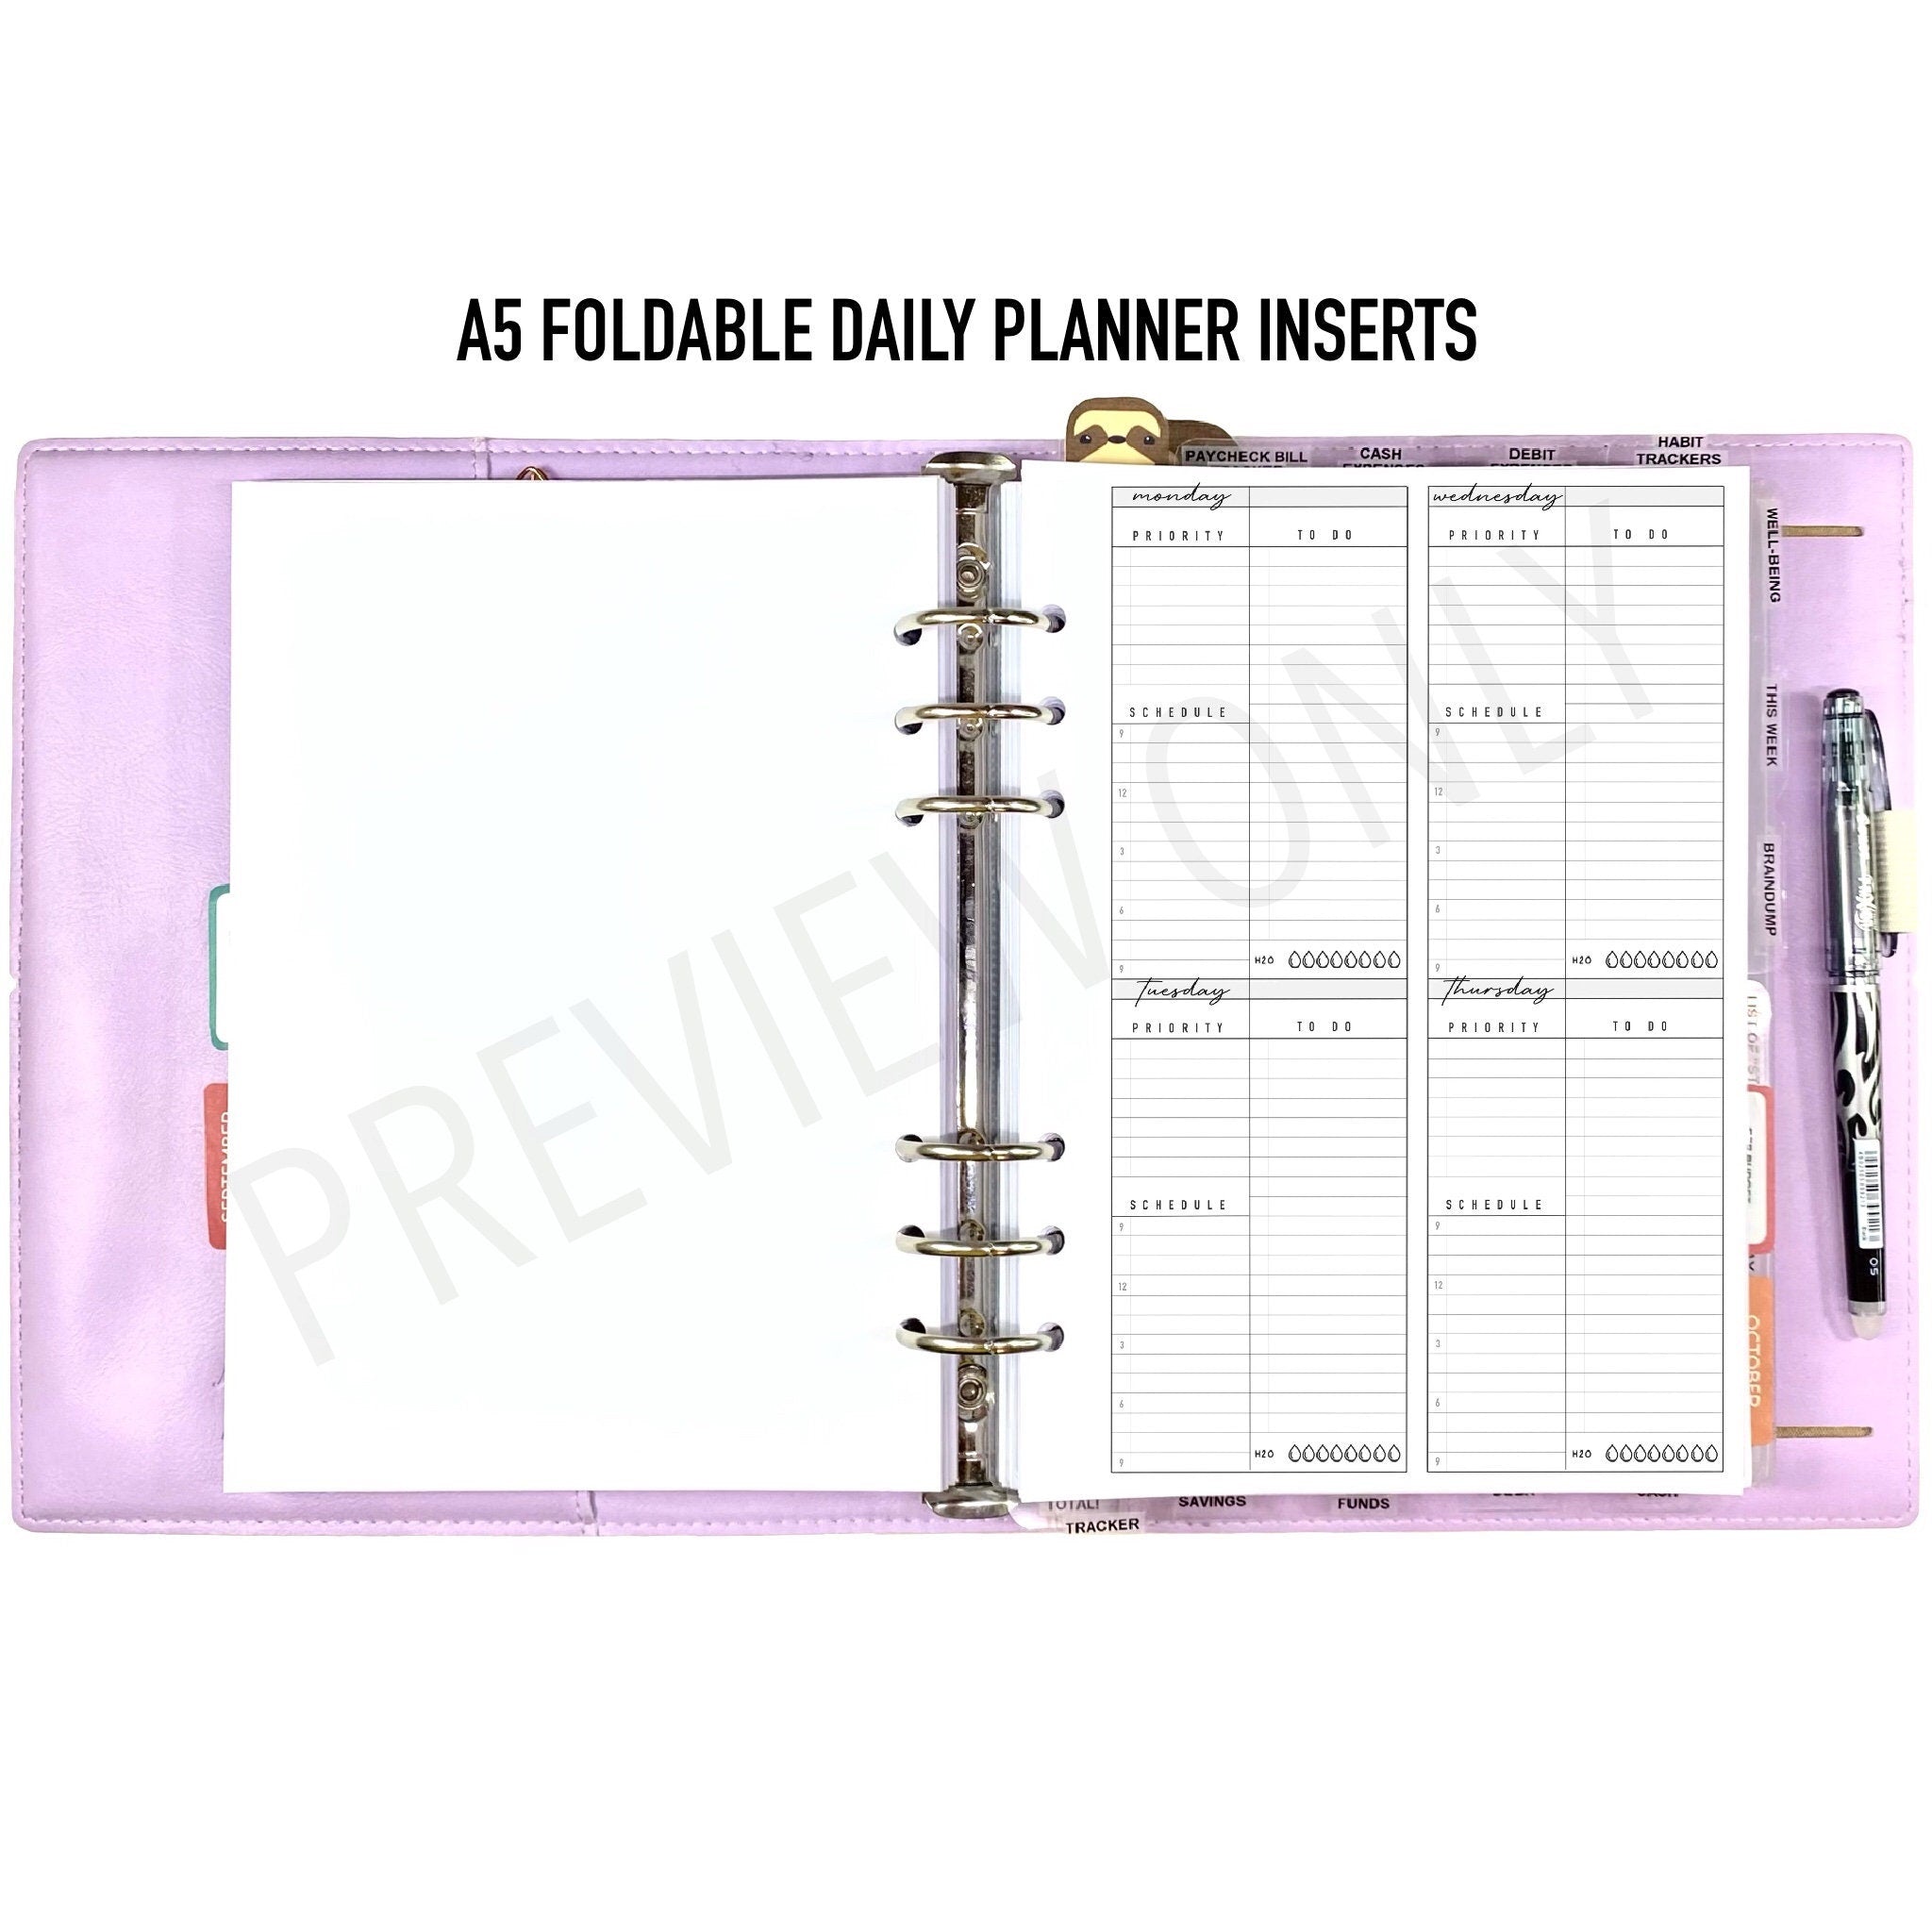 PRINTED Paper Refill Planner Insert Pages for Your A5 A6 MM -  Norway